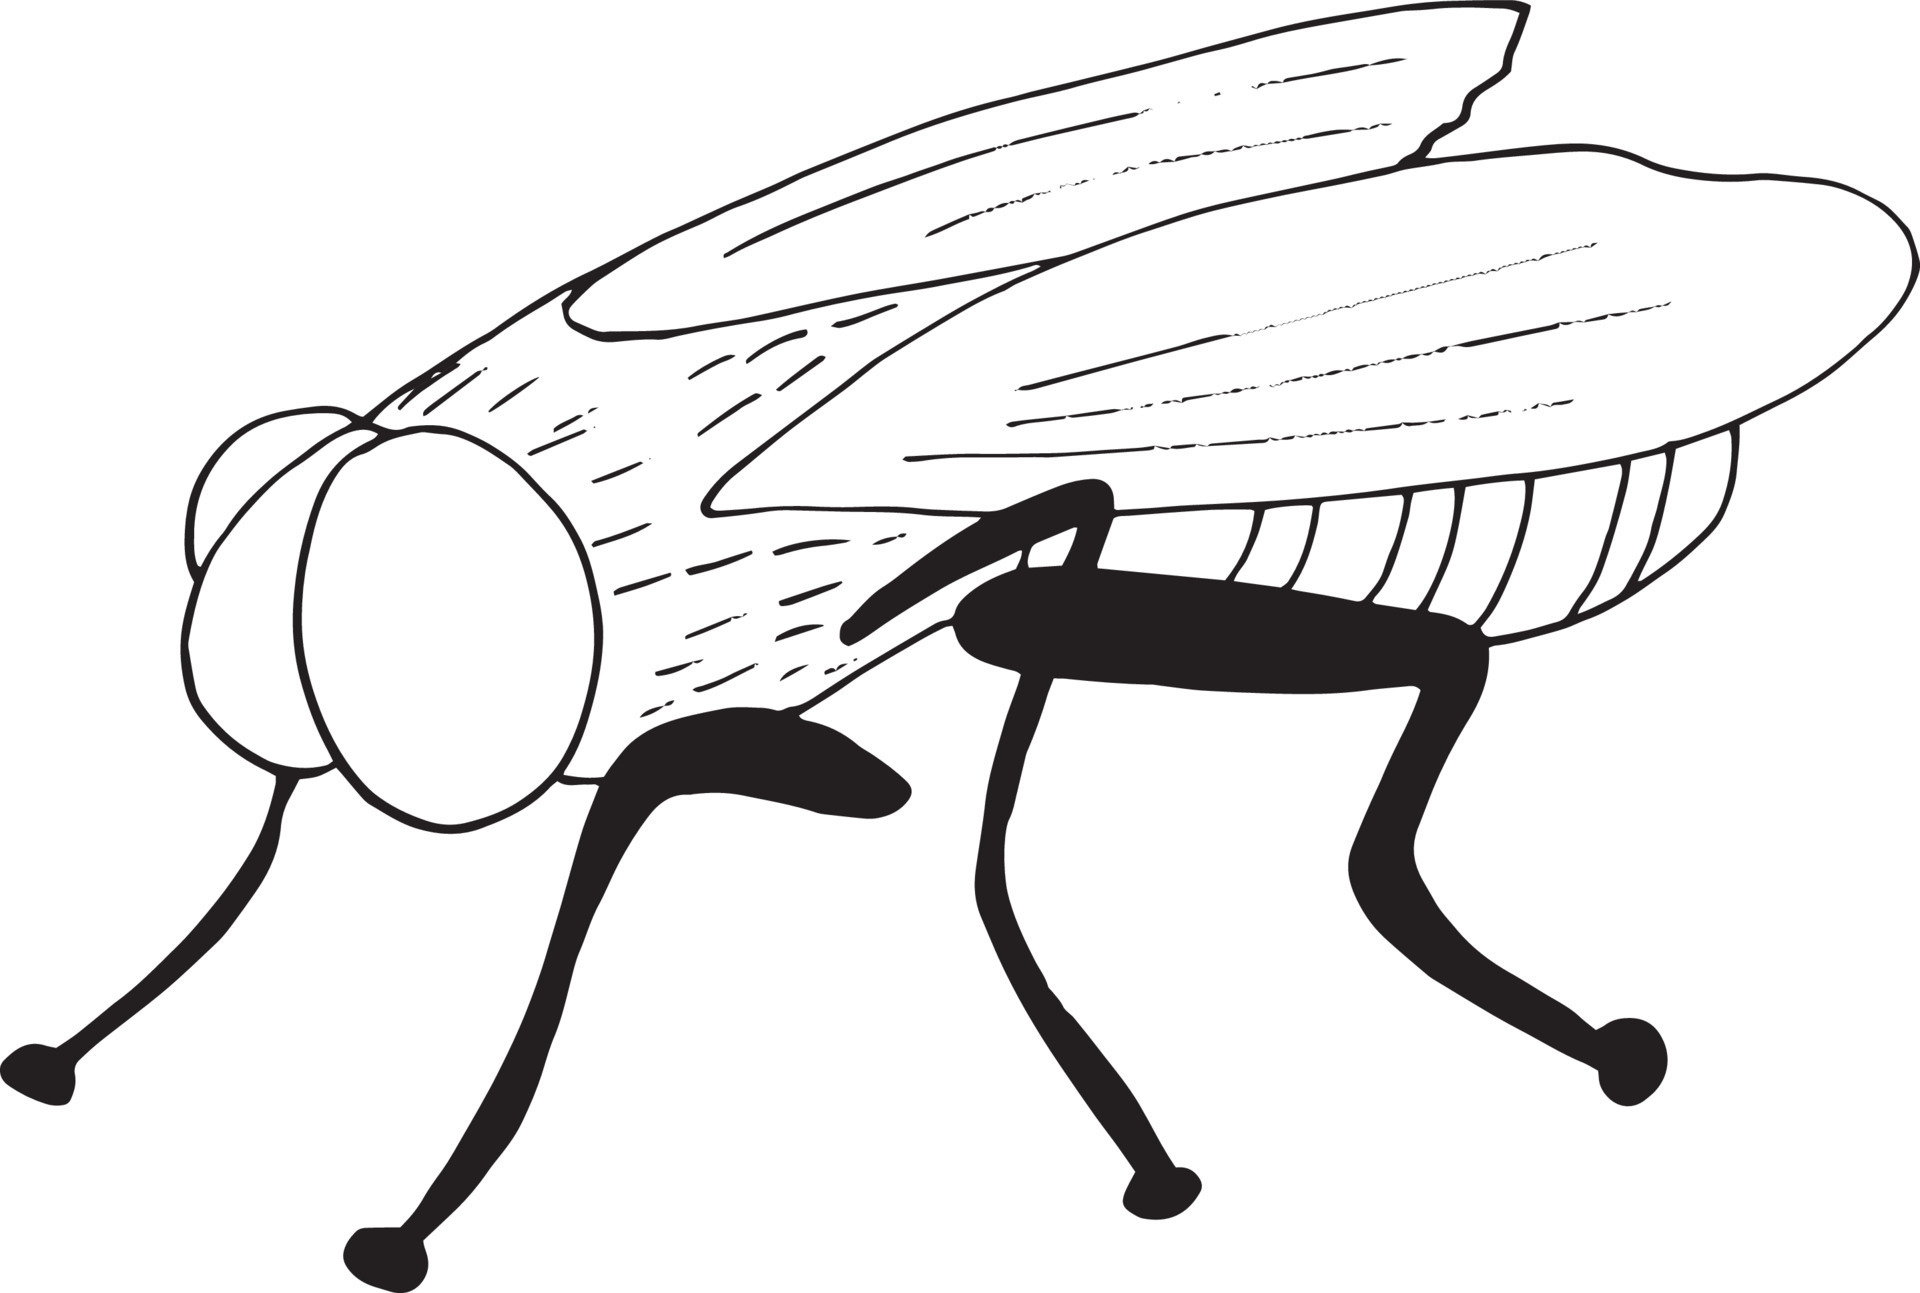 How to Draw a House Fly